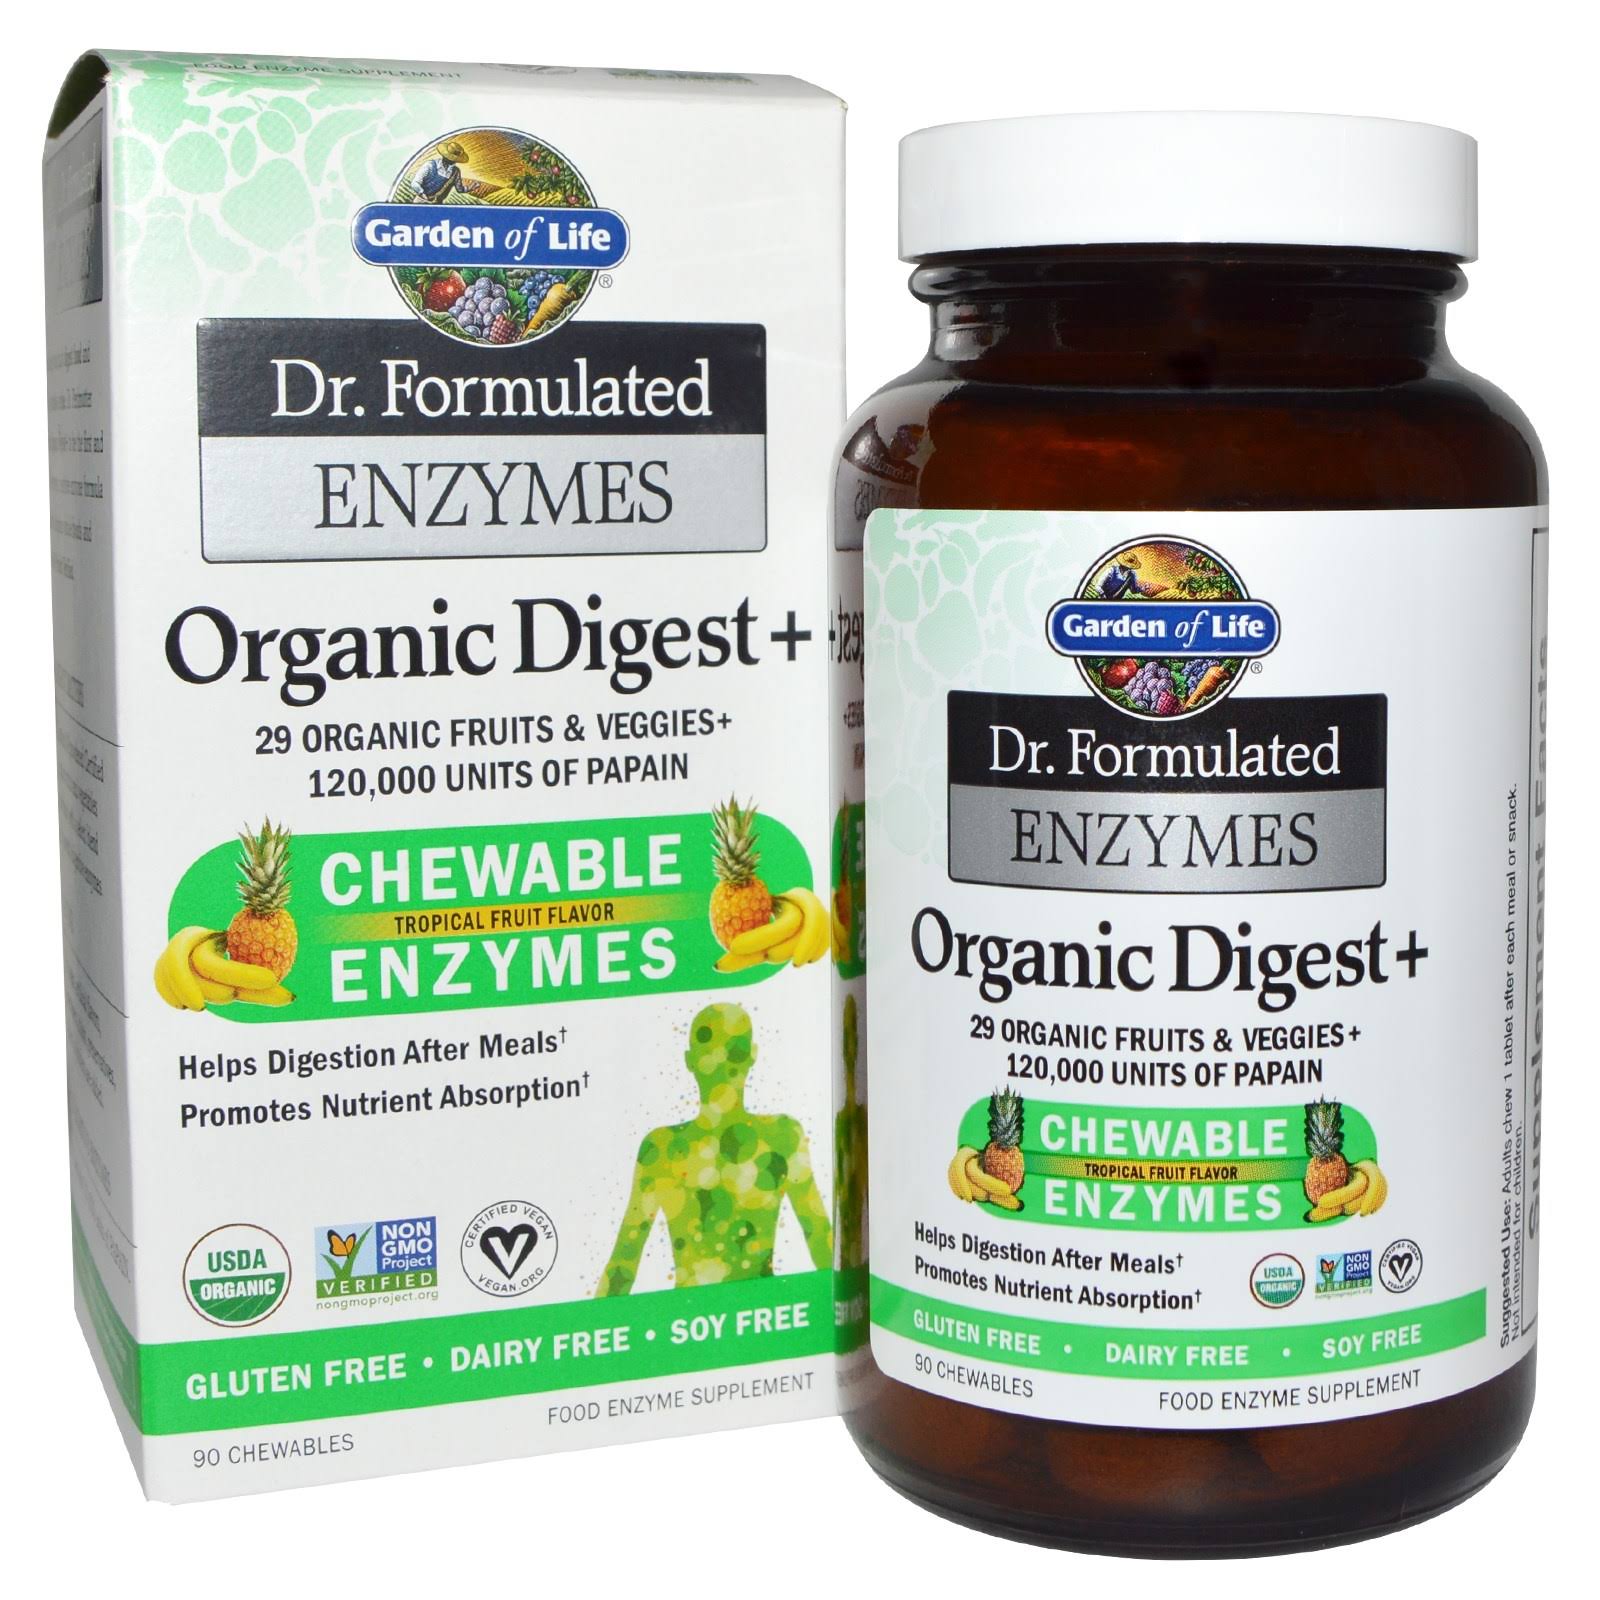 Garden of Life Dr. Formulated Enzymes Organic Digest Plus Supplement - 90 Count, Chewable